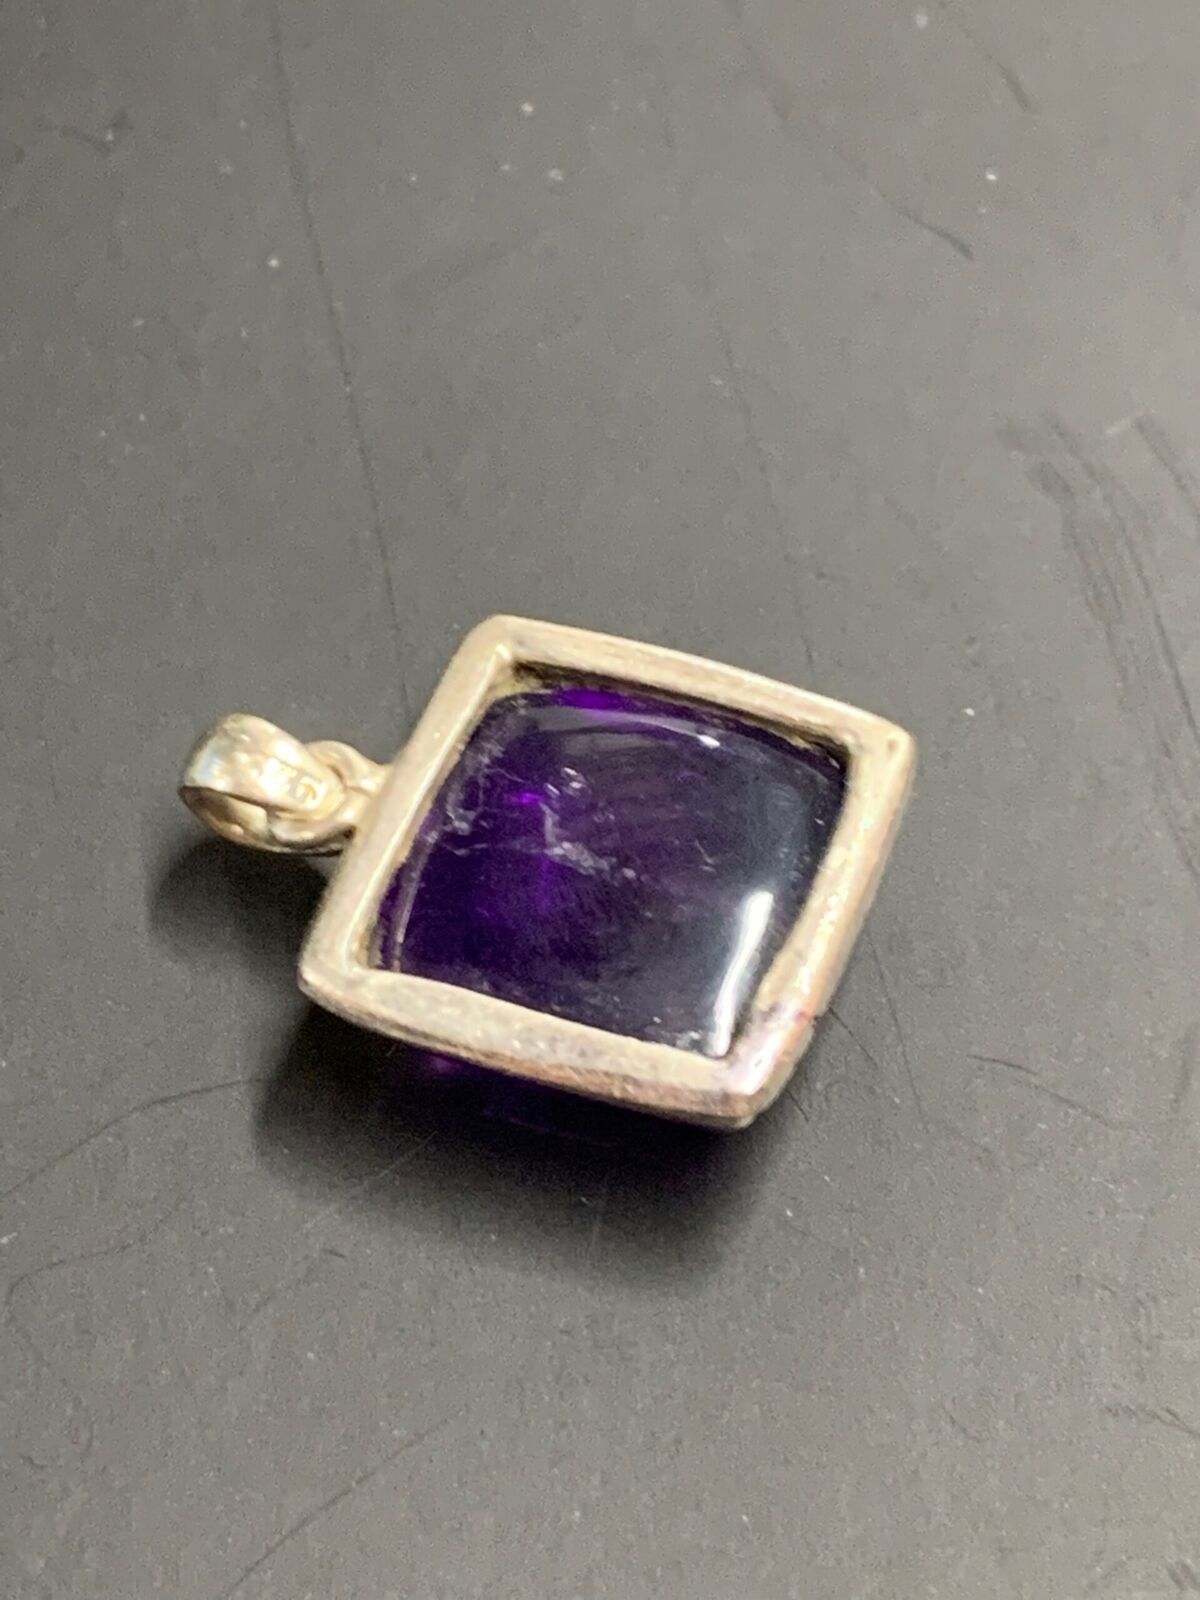 SILVER PENDANT WITH LARGE PURPLE STONE